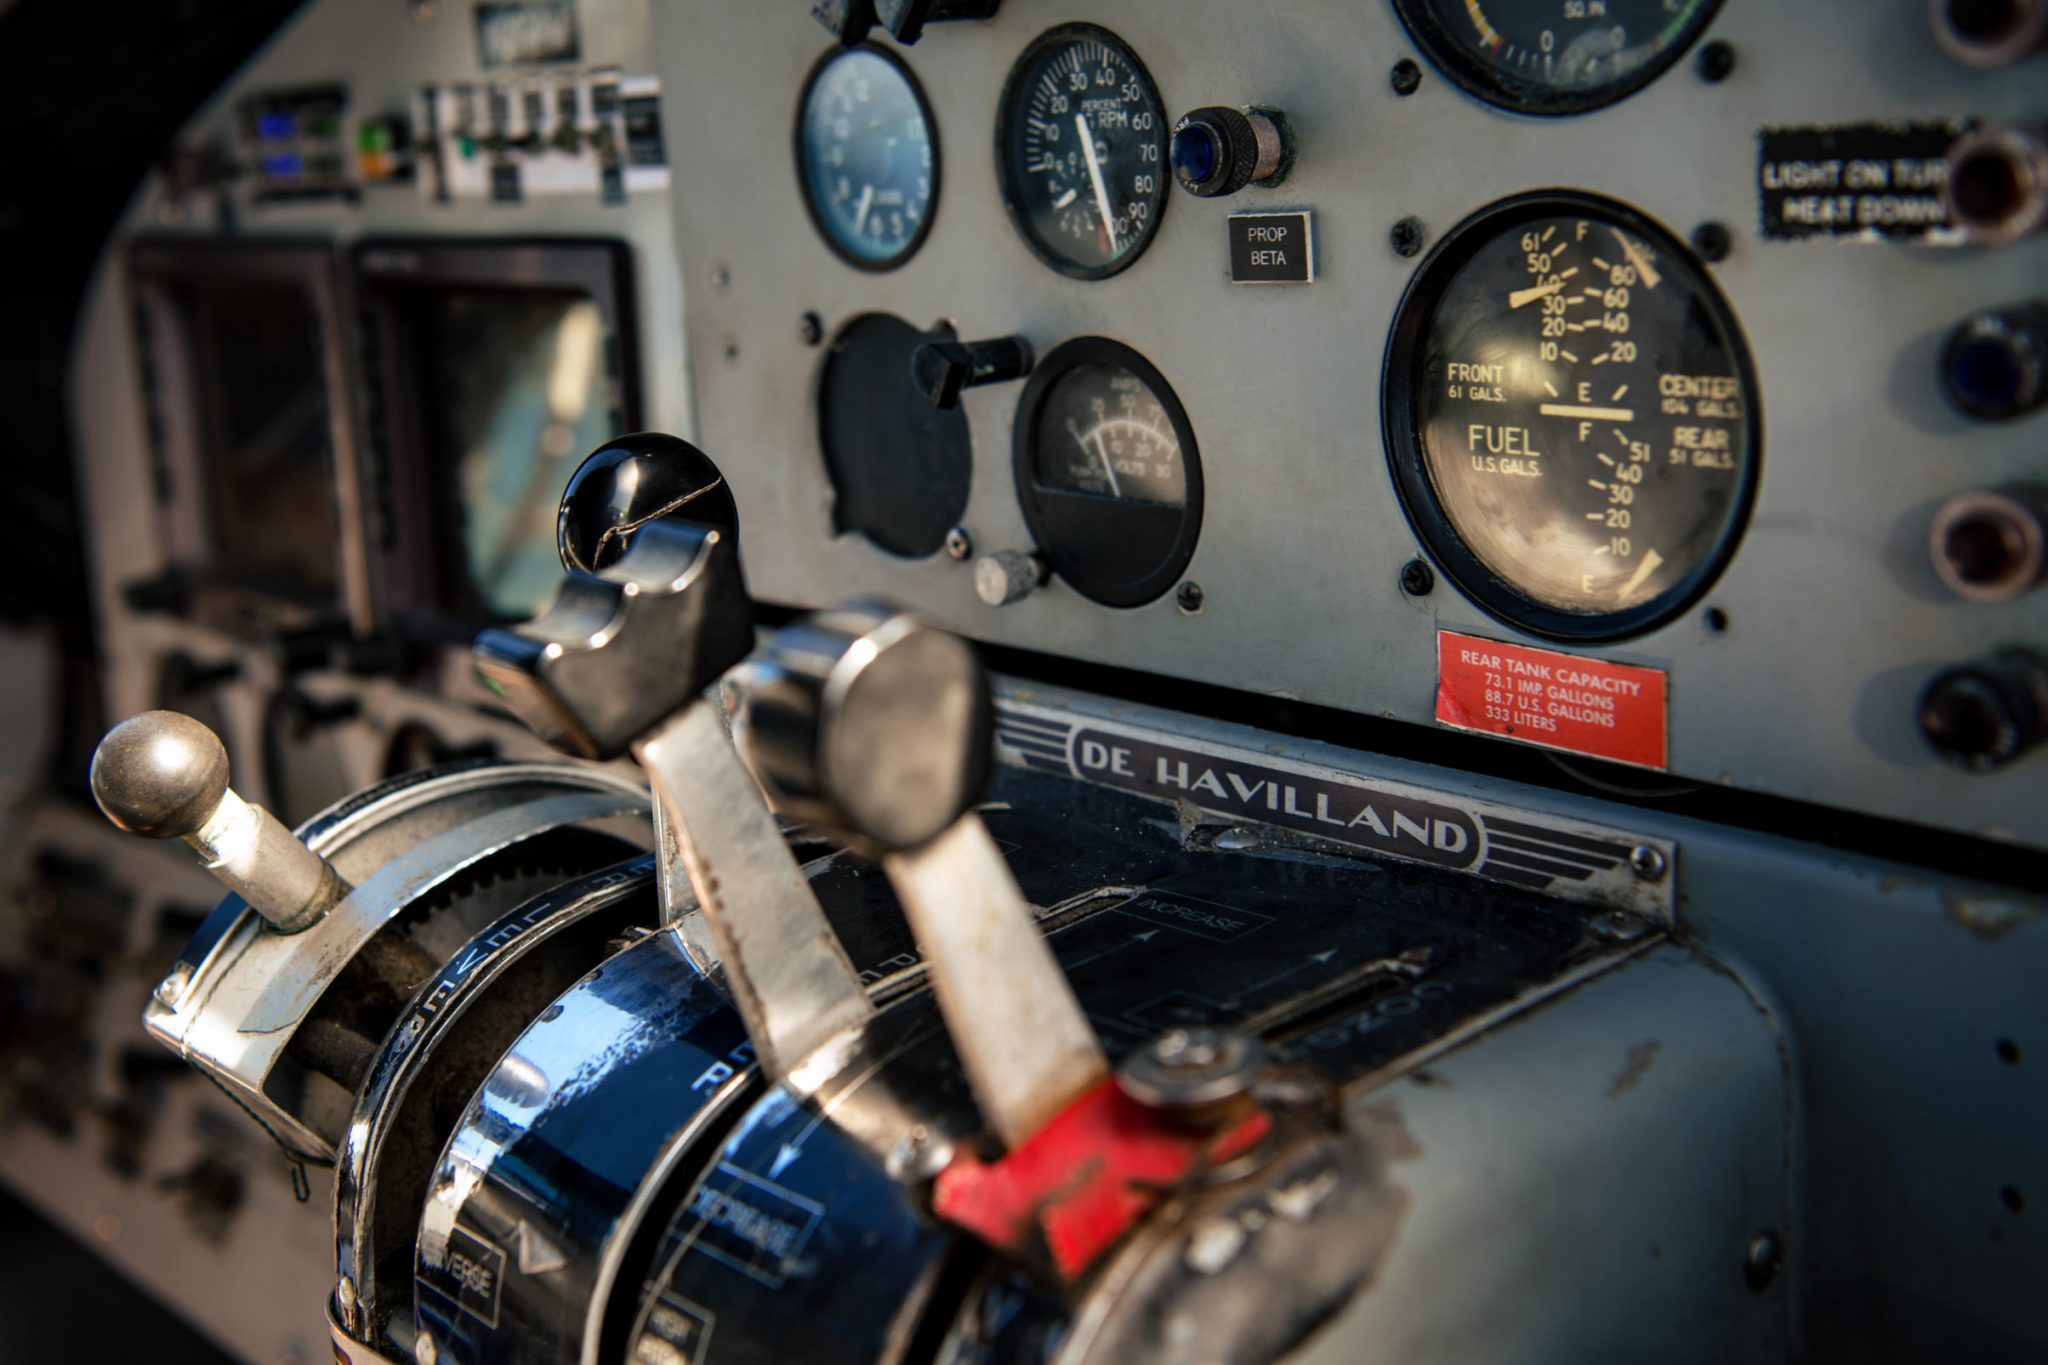 A close up of a cockpit in a plane during a dry tortugas wedding.